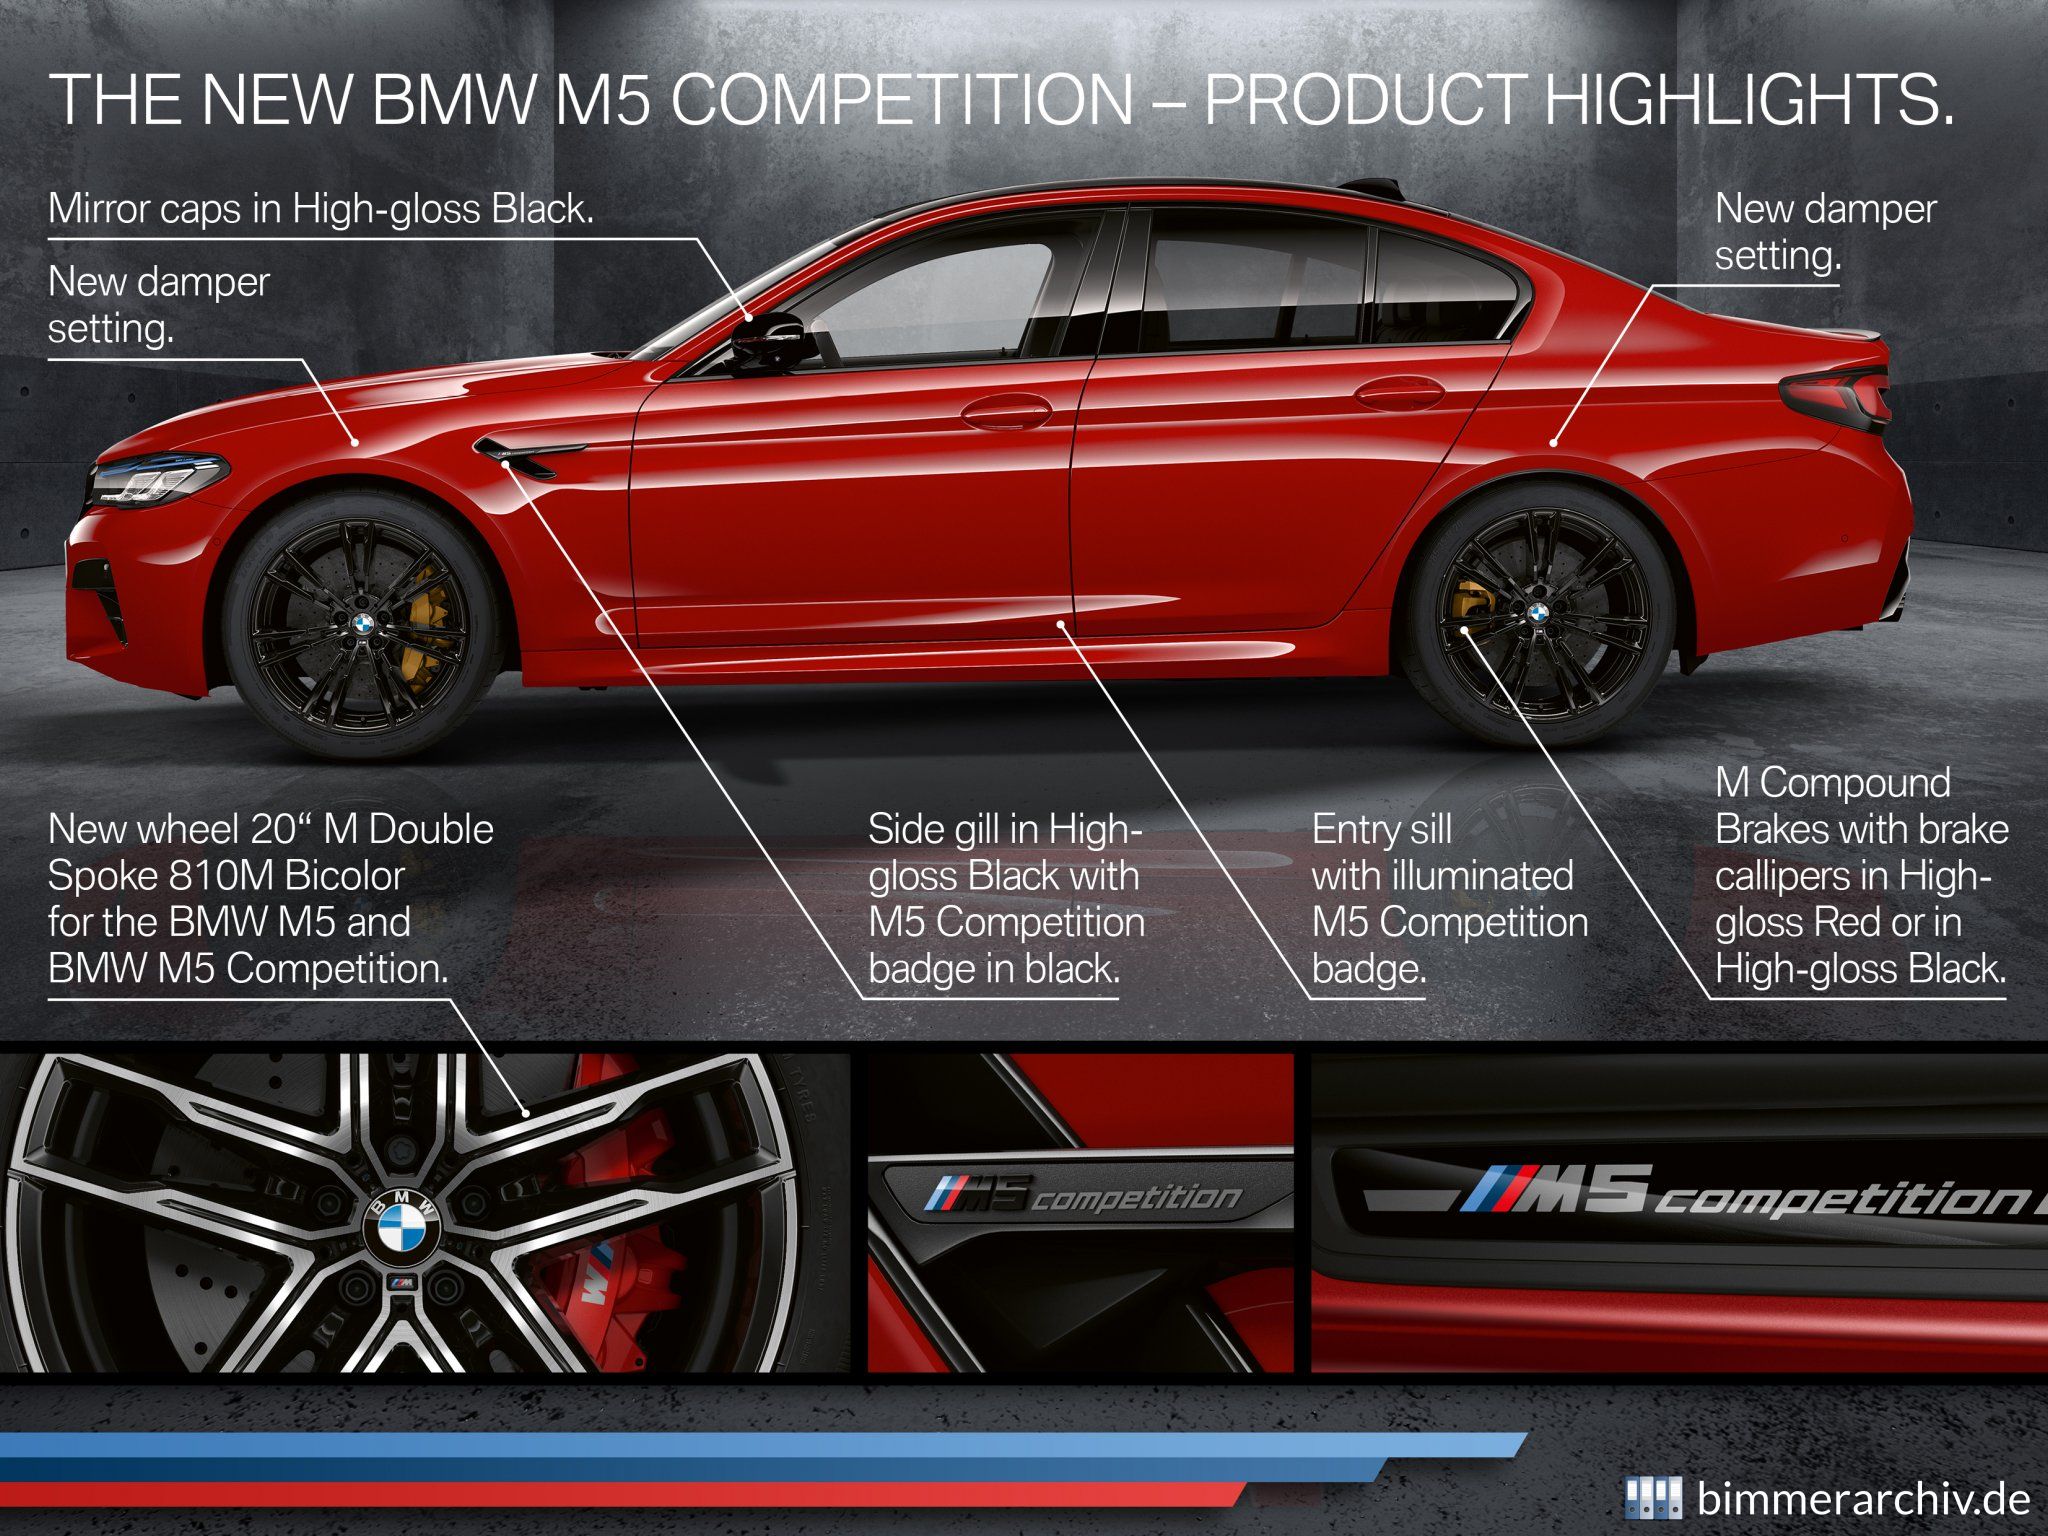 BMW M5 Competition - Highlights